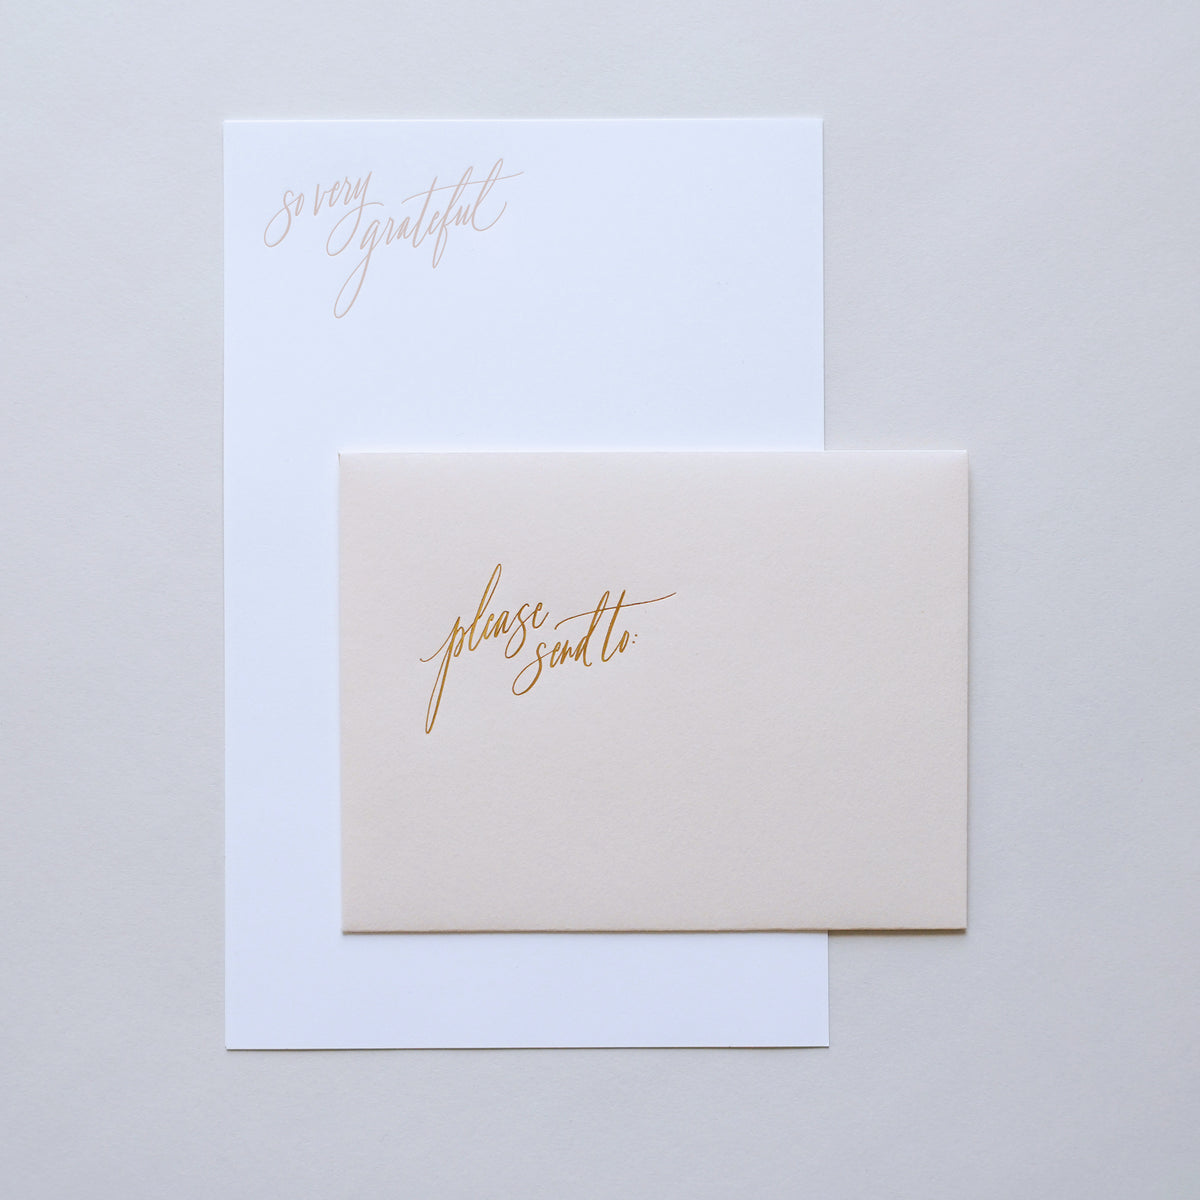 The &quot;So Very Grateful&quot; letter writing set with blush envelope.